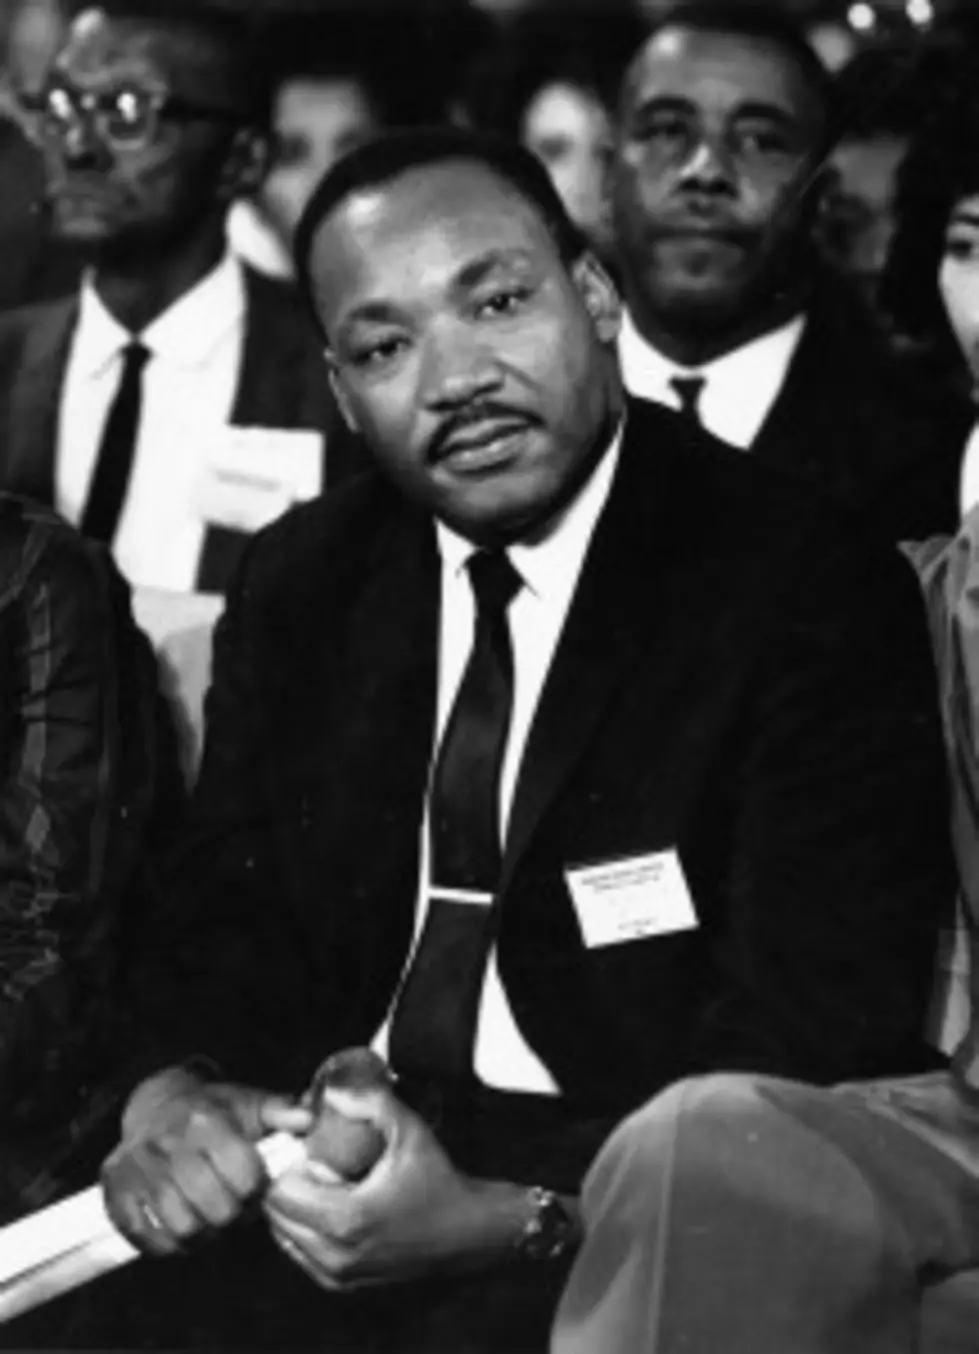 Remembering Dr Martin Luther King Jr. [VIDEO]